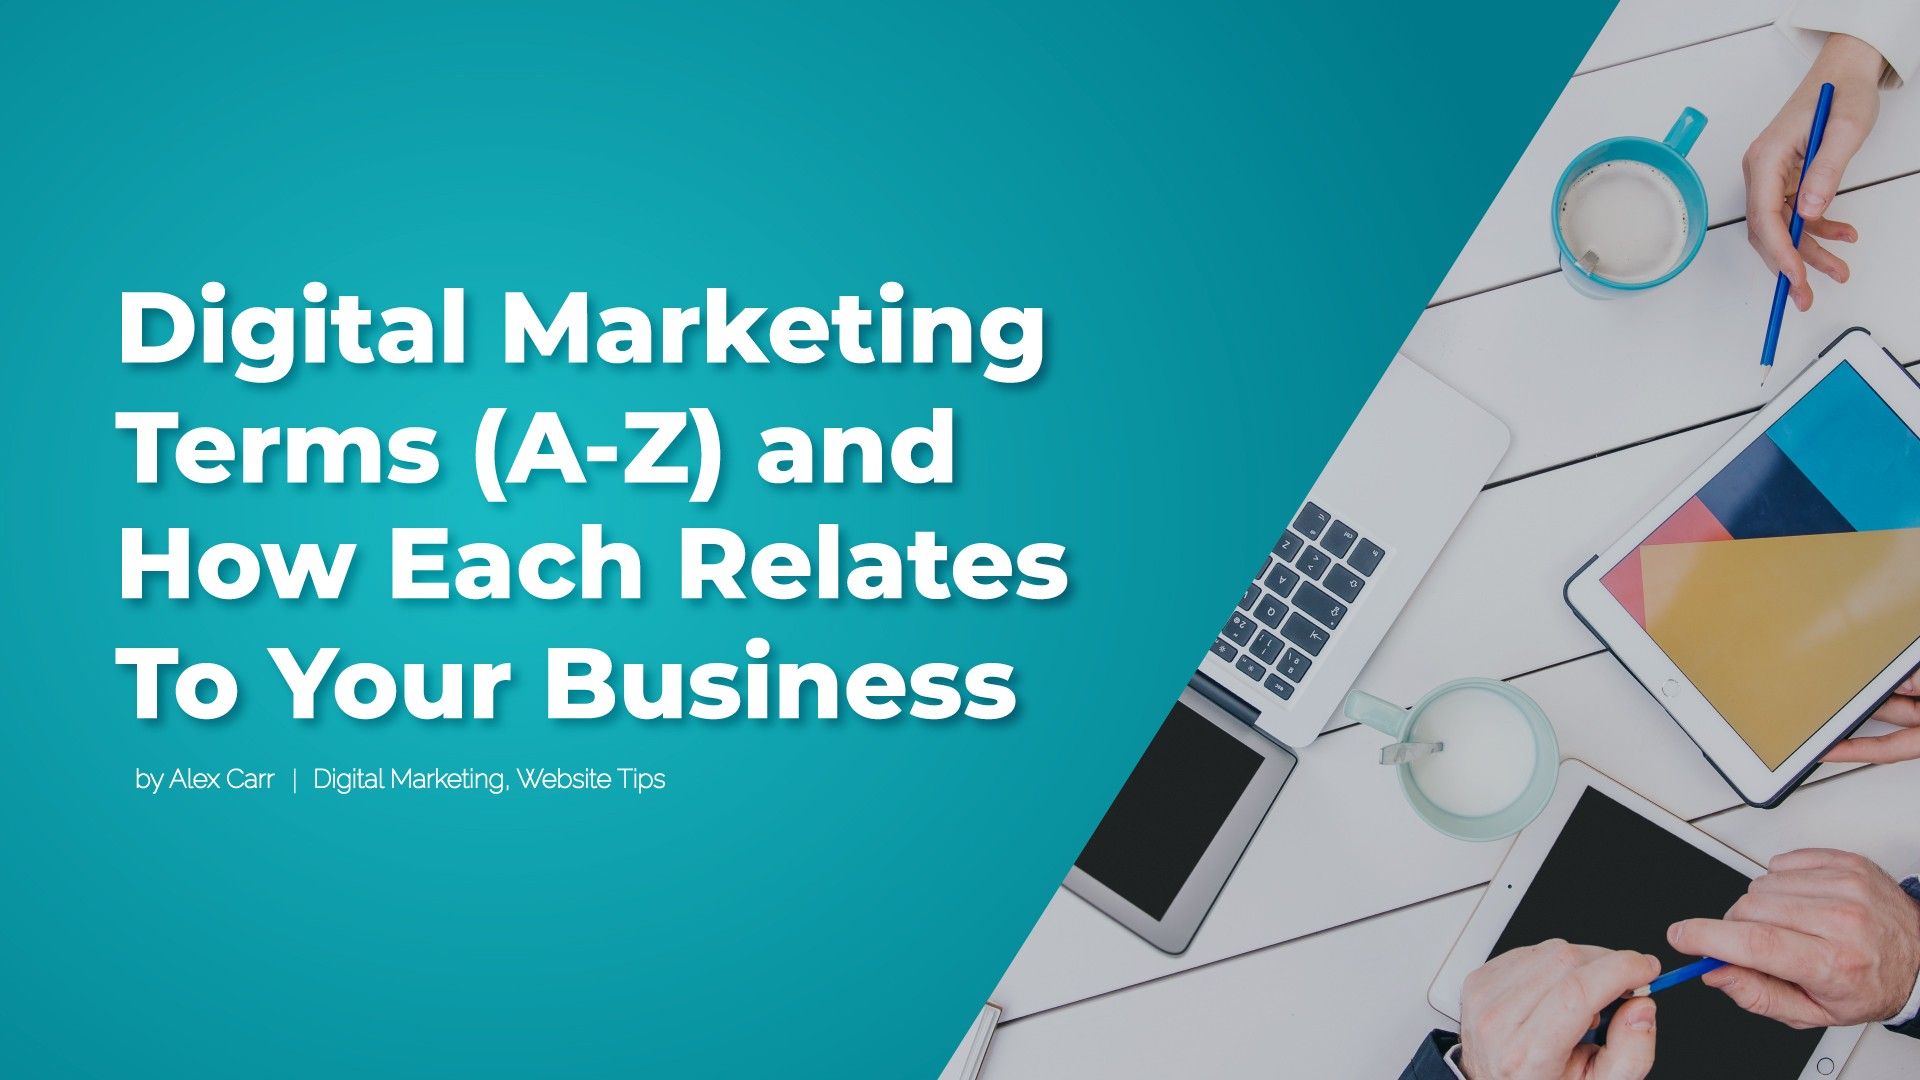 Digital Marketing Terms (A-Z) and How Each Relates To Your Business